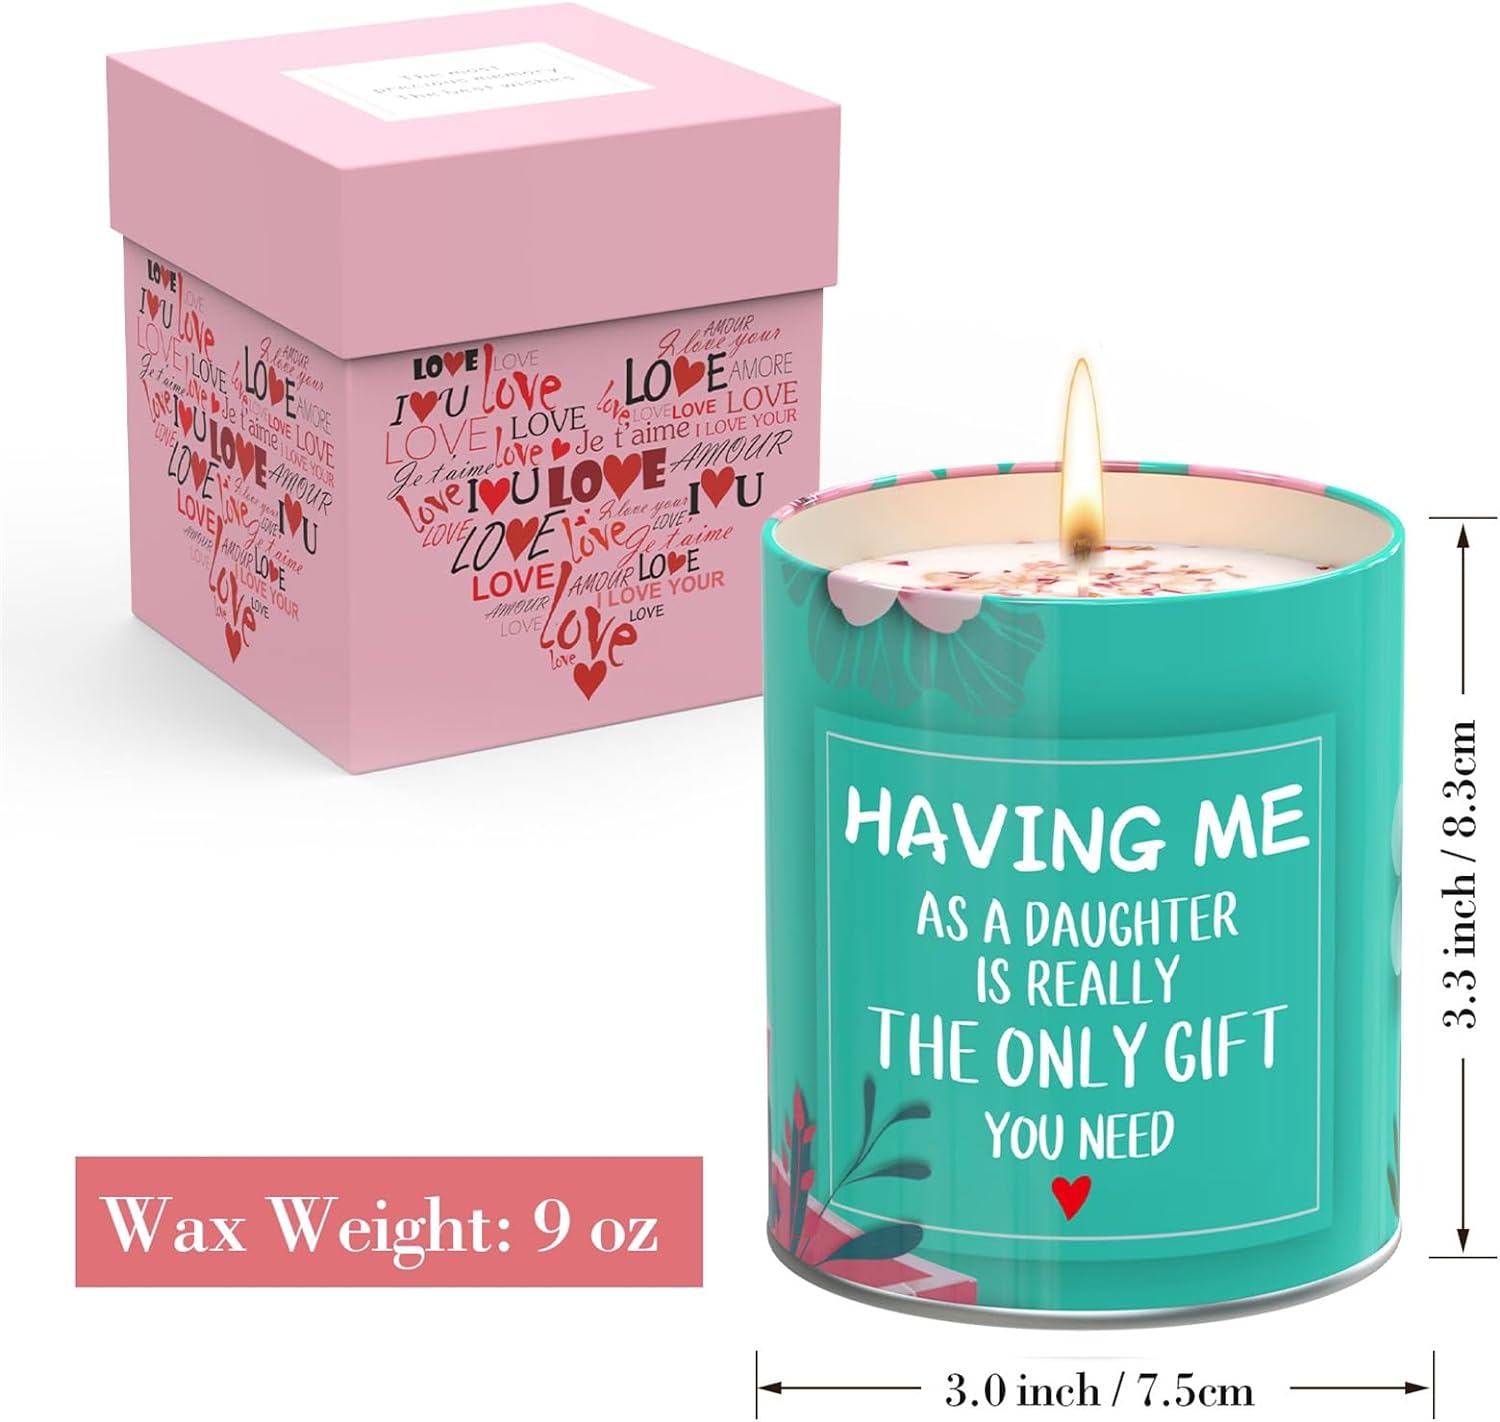 Mothers Day Gifts For Mom,Gifts From Daughter,Mom Gifts Ideas Birthday Gifts For Mom,Christmas Gifts For Mom Funny Gifts Ideas-Scented Candles 9Oz